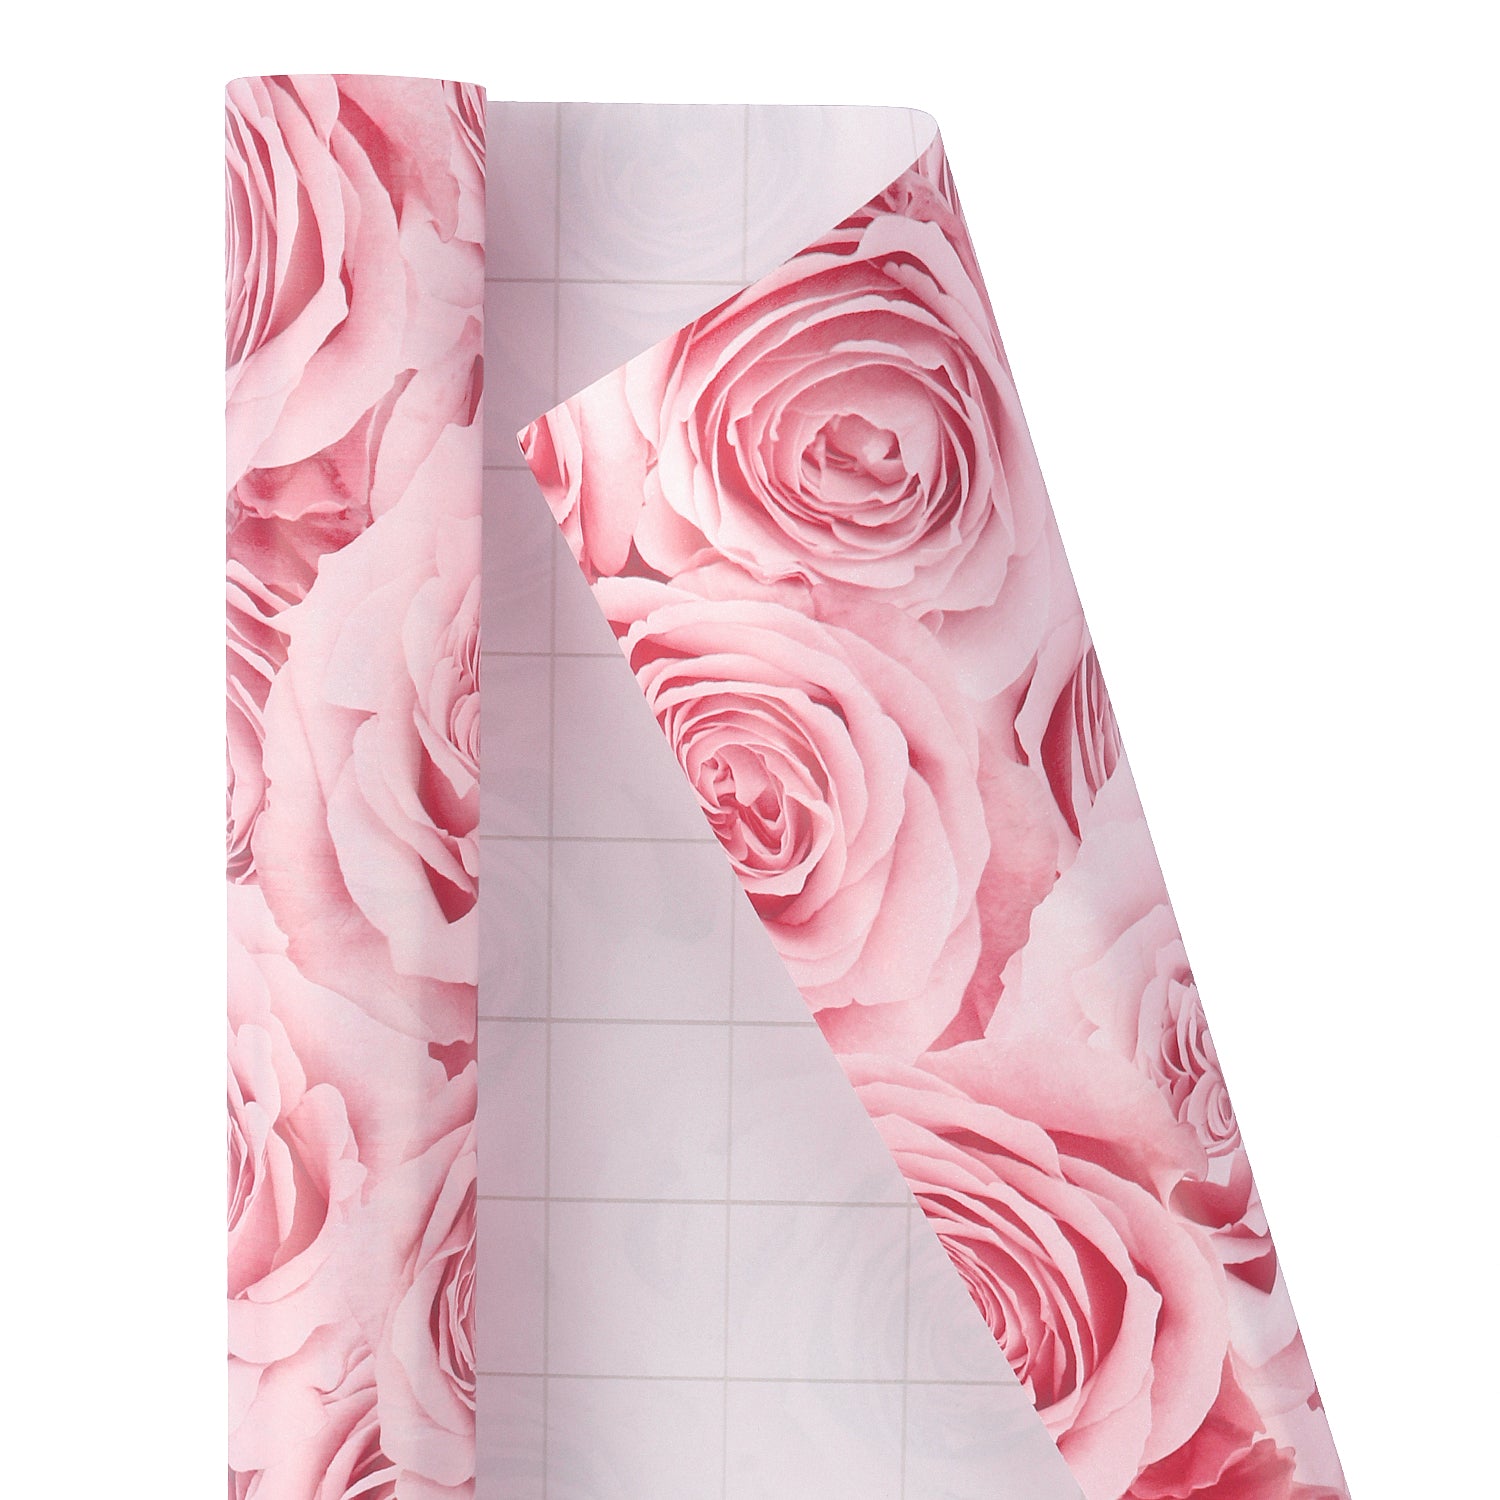 MAYPLUSS Wrapping Paper Roll - Mini Roll - 17.3 inch X 120 inch Per roll -  3 Different Pinke and Gray Floral Design (43.2 sq.ft.ttl)